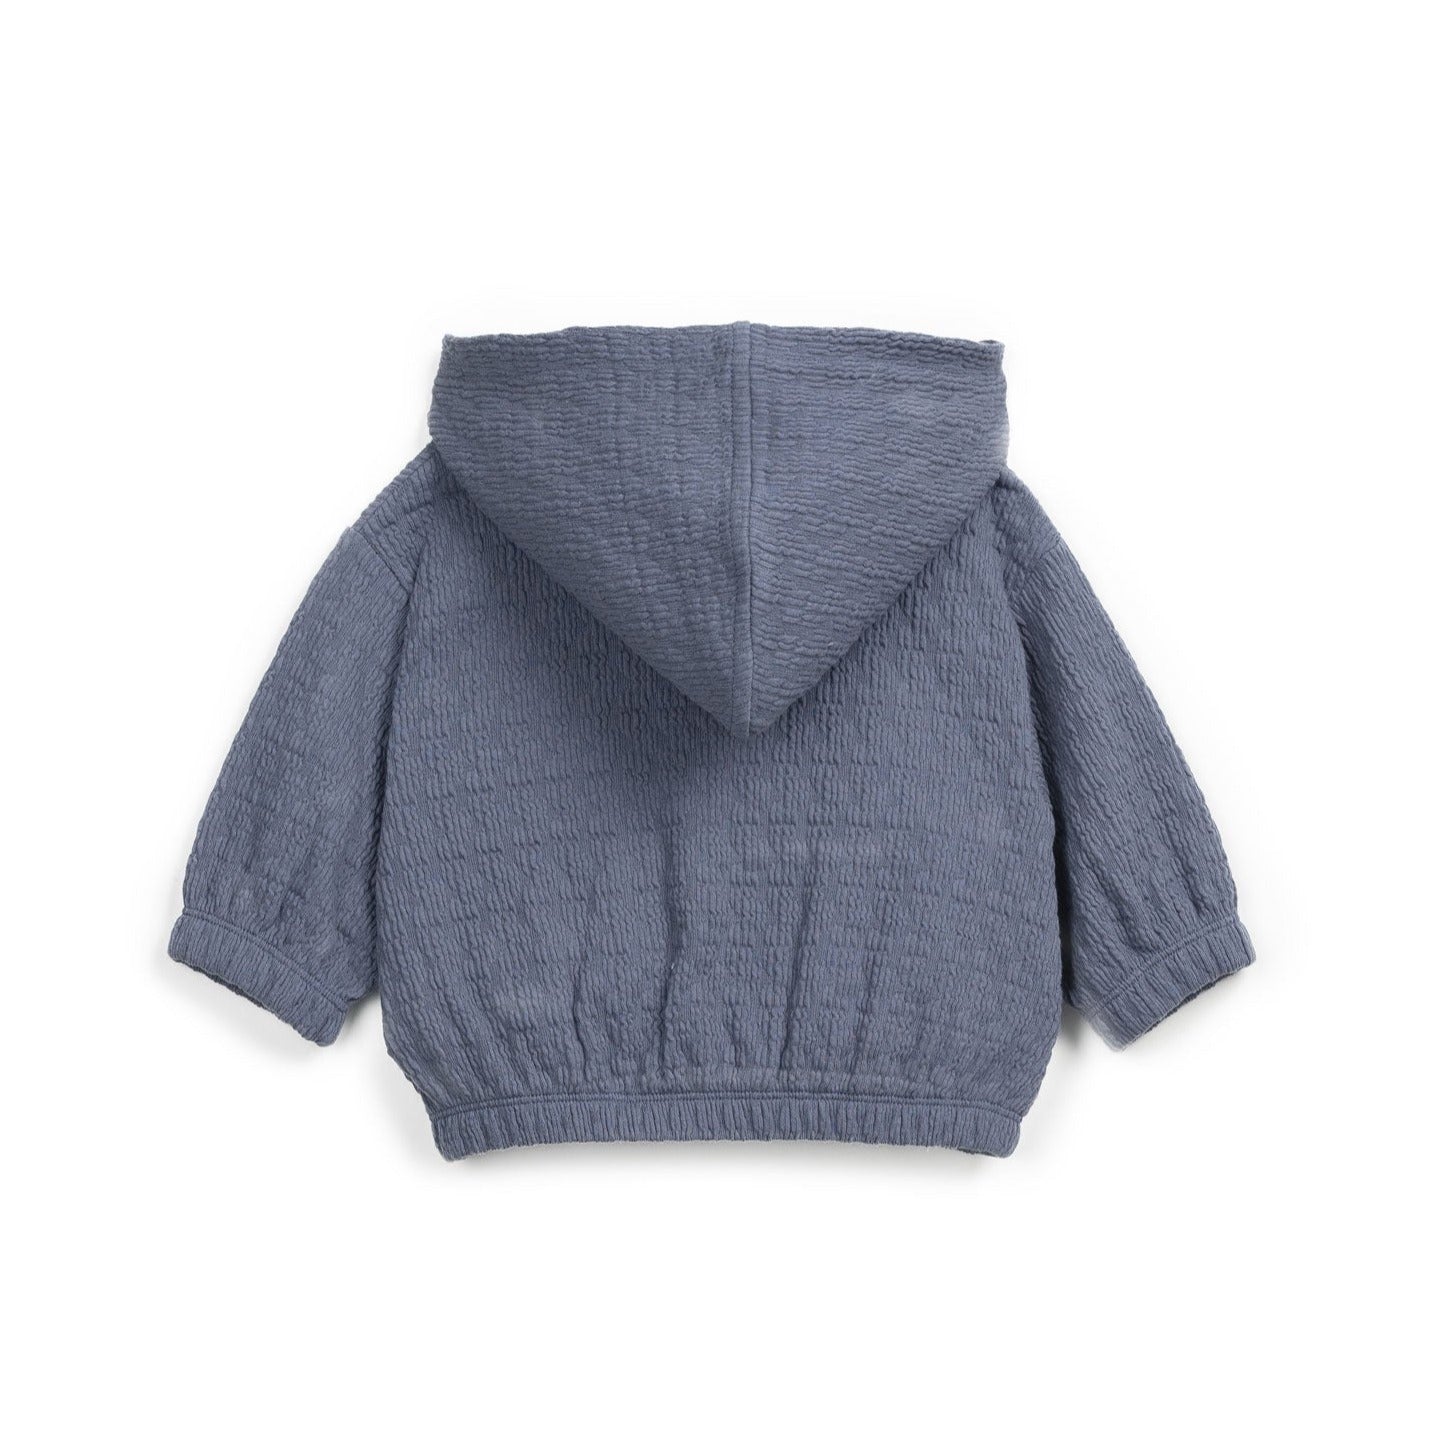 PLAY-UP / Jersey Jacquard sweater, BABY